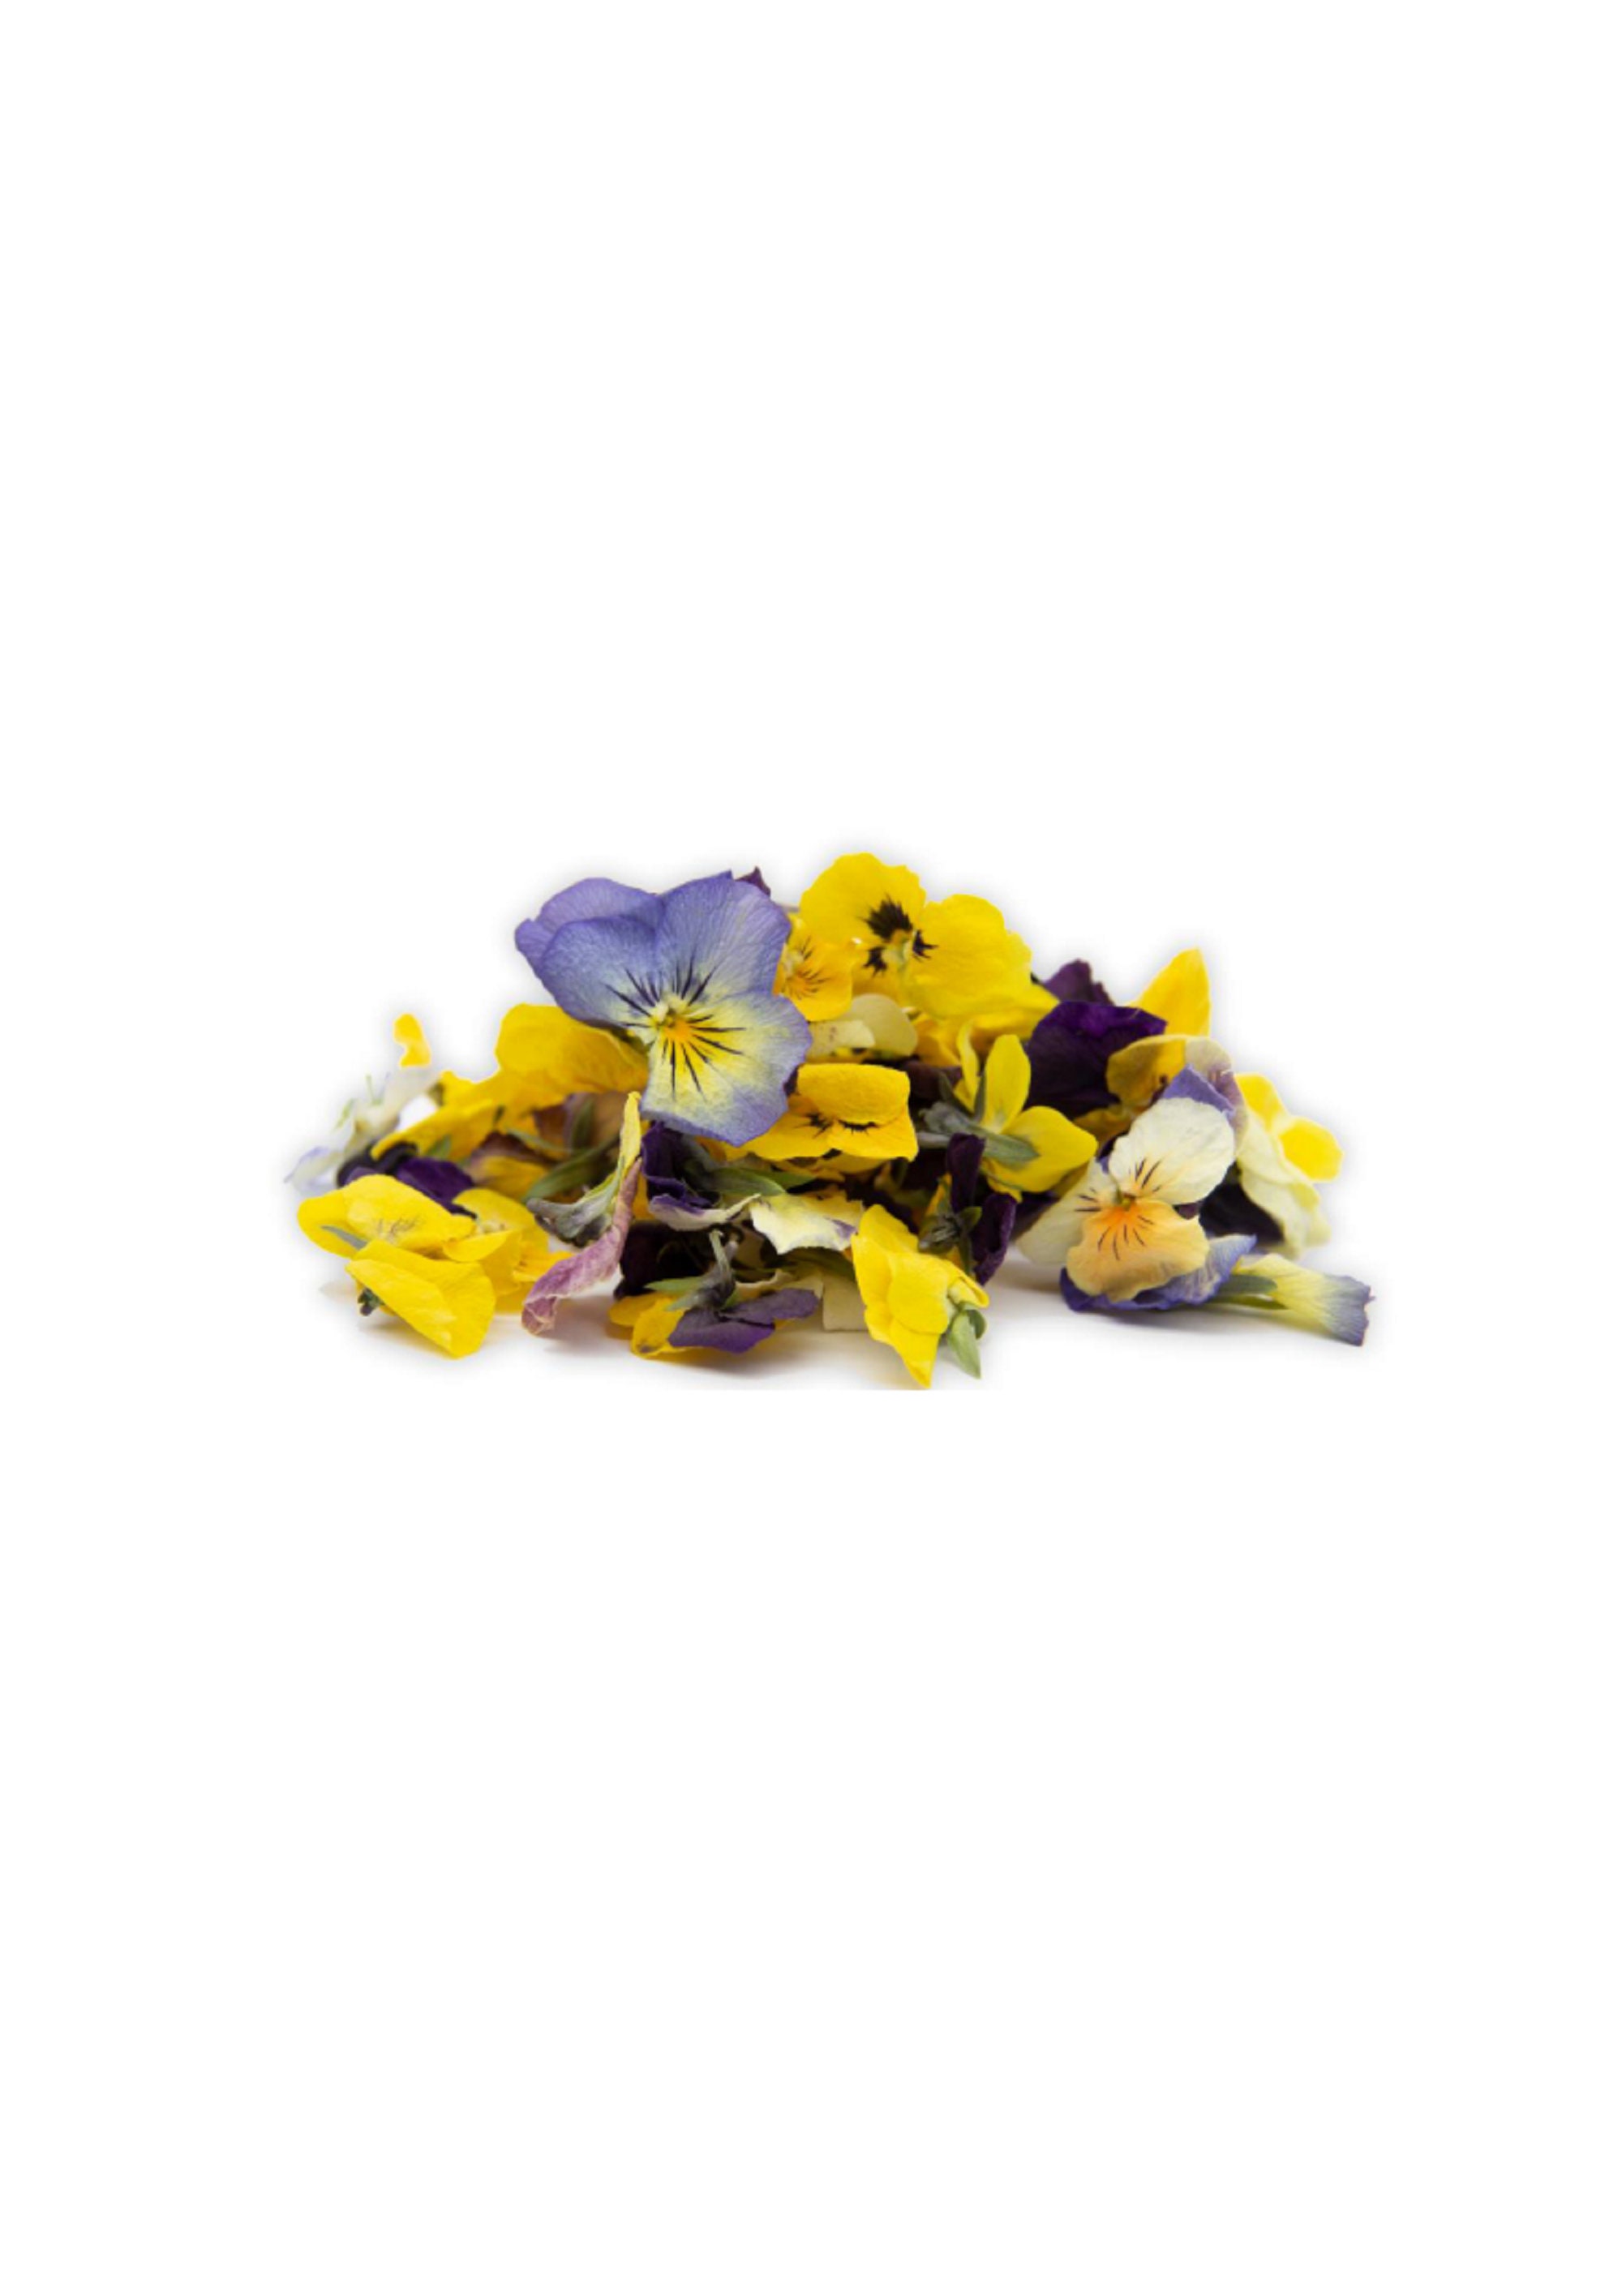 Fun Ways to Use Edible Flowers - The Inspired Room